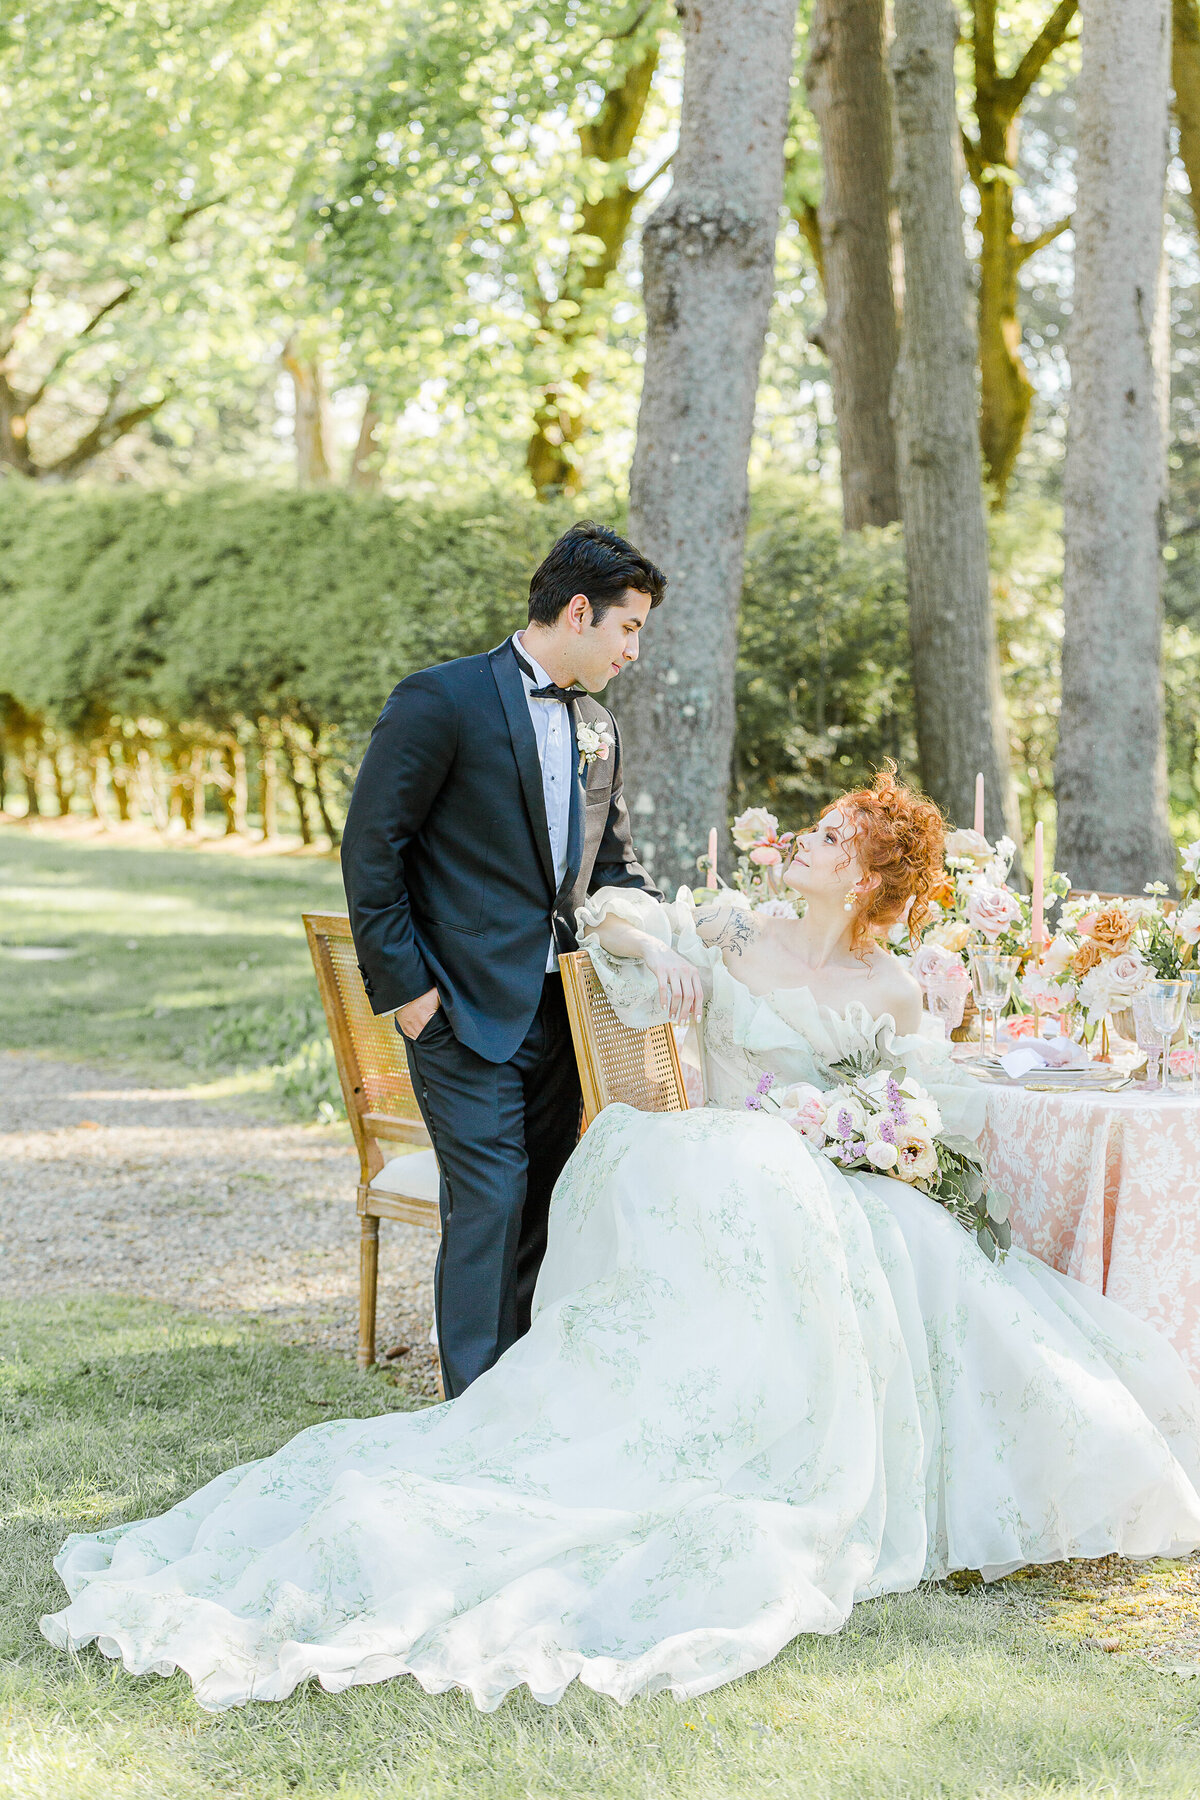 Bride and groom share a glance at their North Shore Boston outdoor wedding reception. Captured by best Massachusetts wedding photographer Lia Rose Weddings